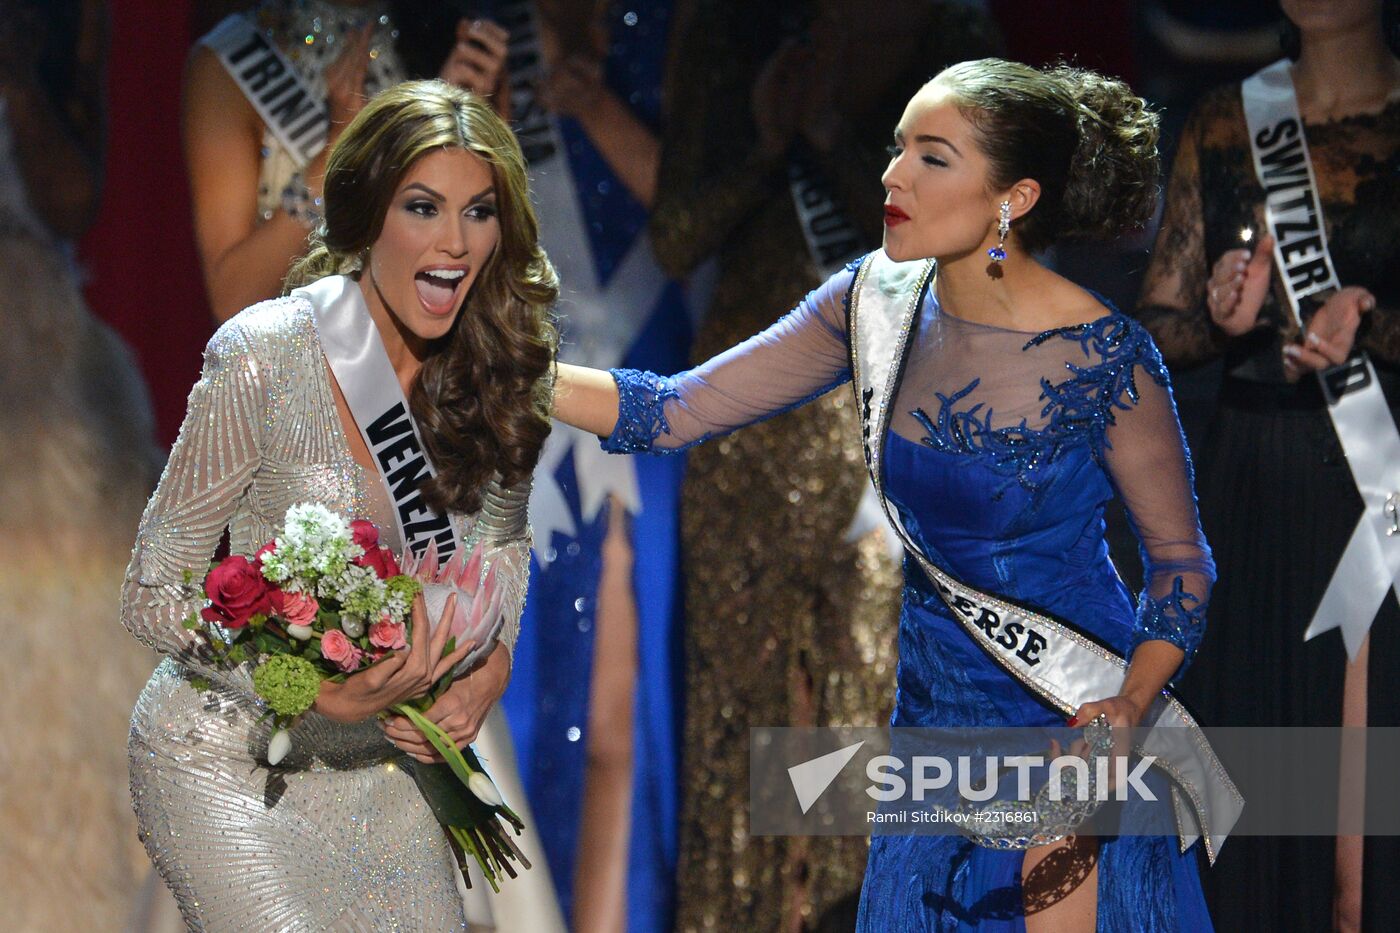 Finals show of Miss Universe 2013 contest